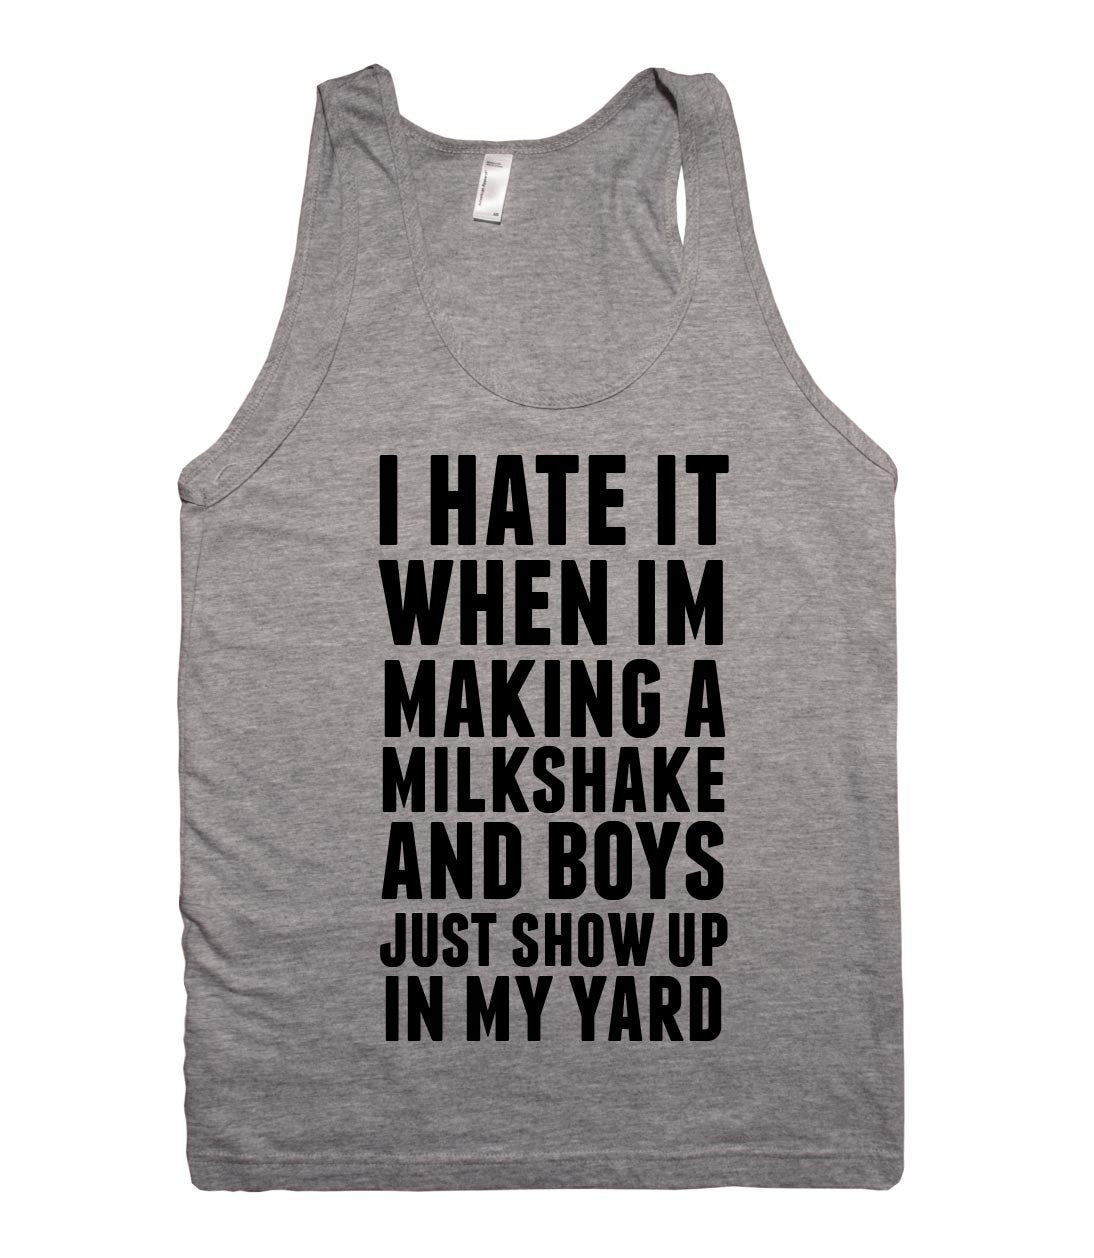 i hate it when im making a milkshake and boys just show up in my yard tank top - Shirtoopia